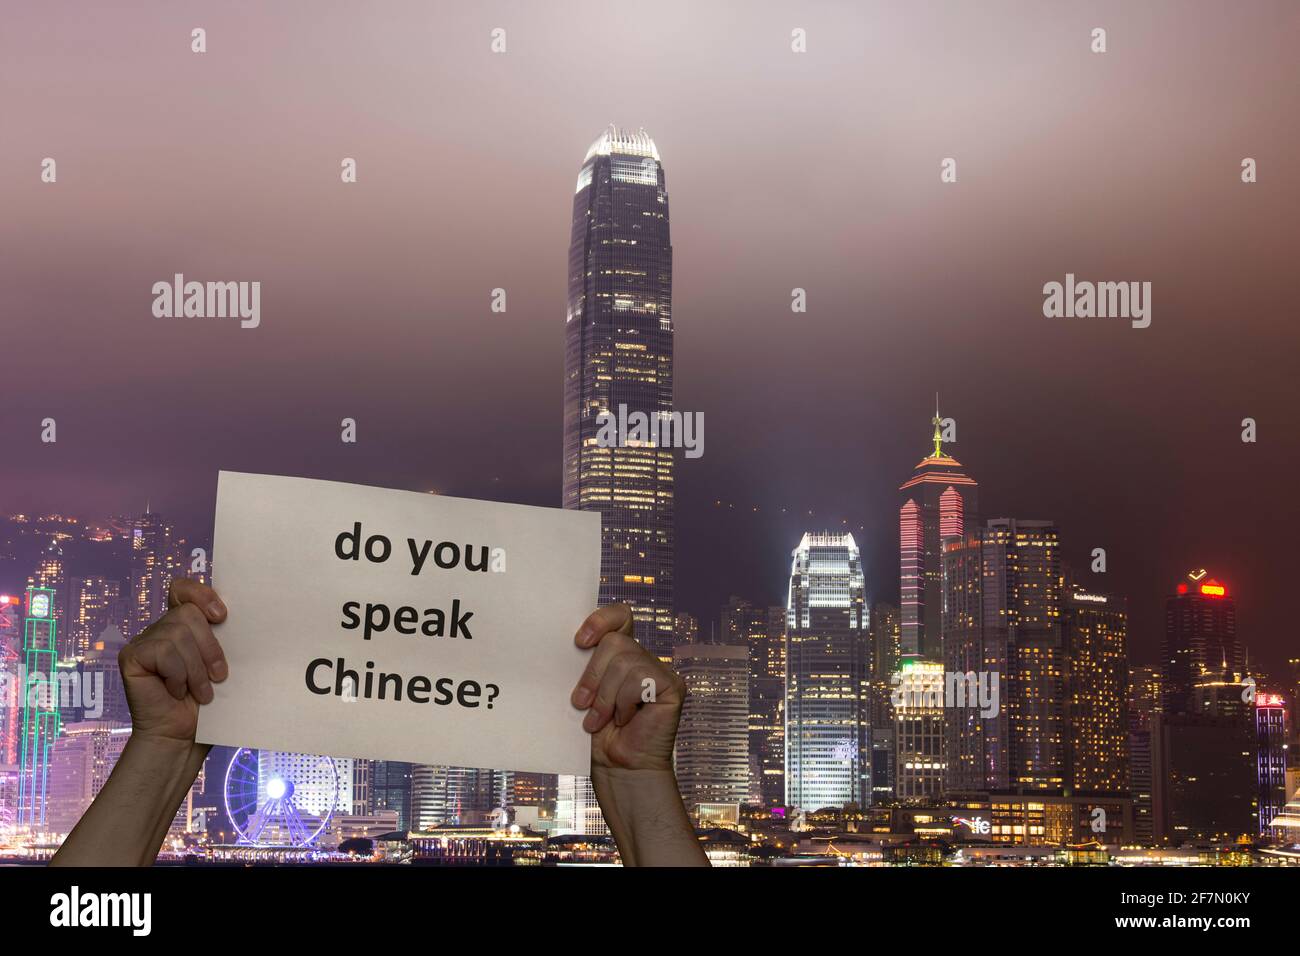 a man holding a sign in his hands and in the background the lights of the skyscrapers on Hong Kong Island Stock Photo